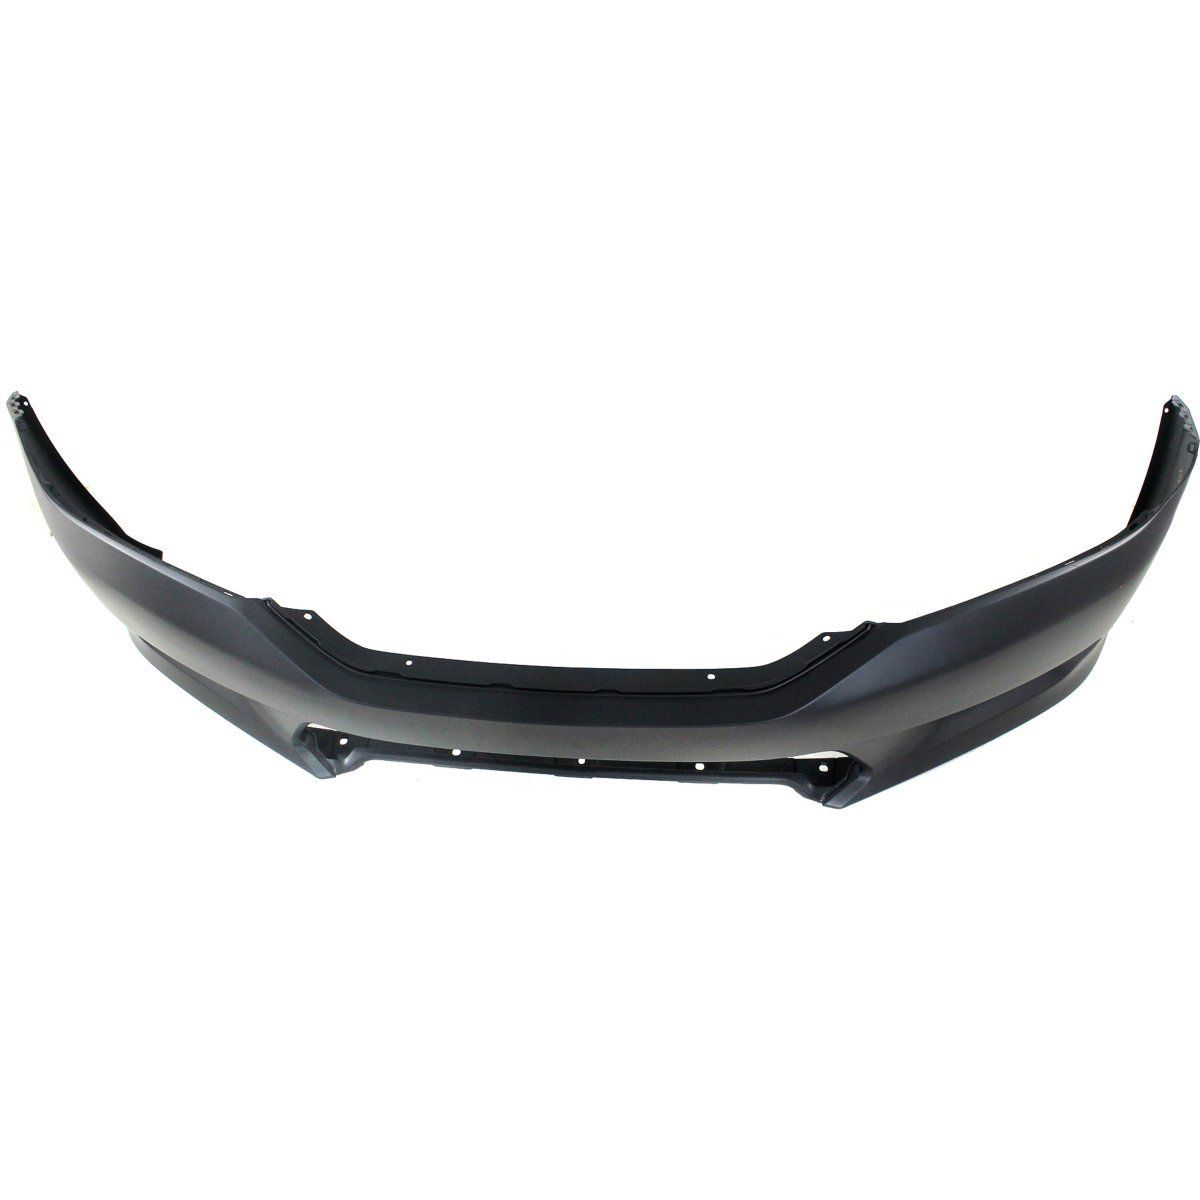 2013-2015 HONDA ACCORD Front Bumper Cover Sedan Painted to Match